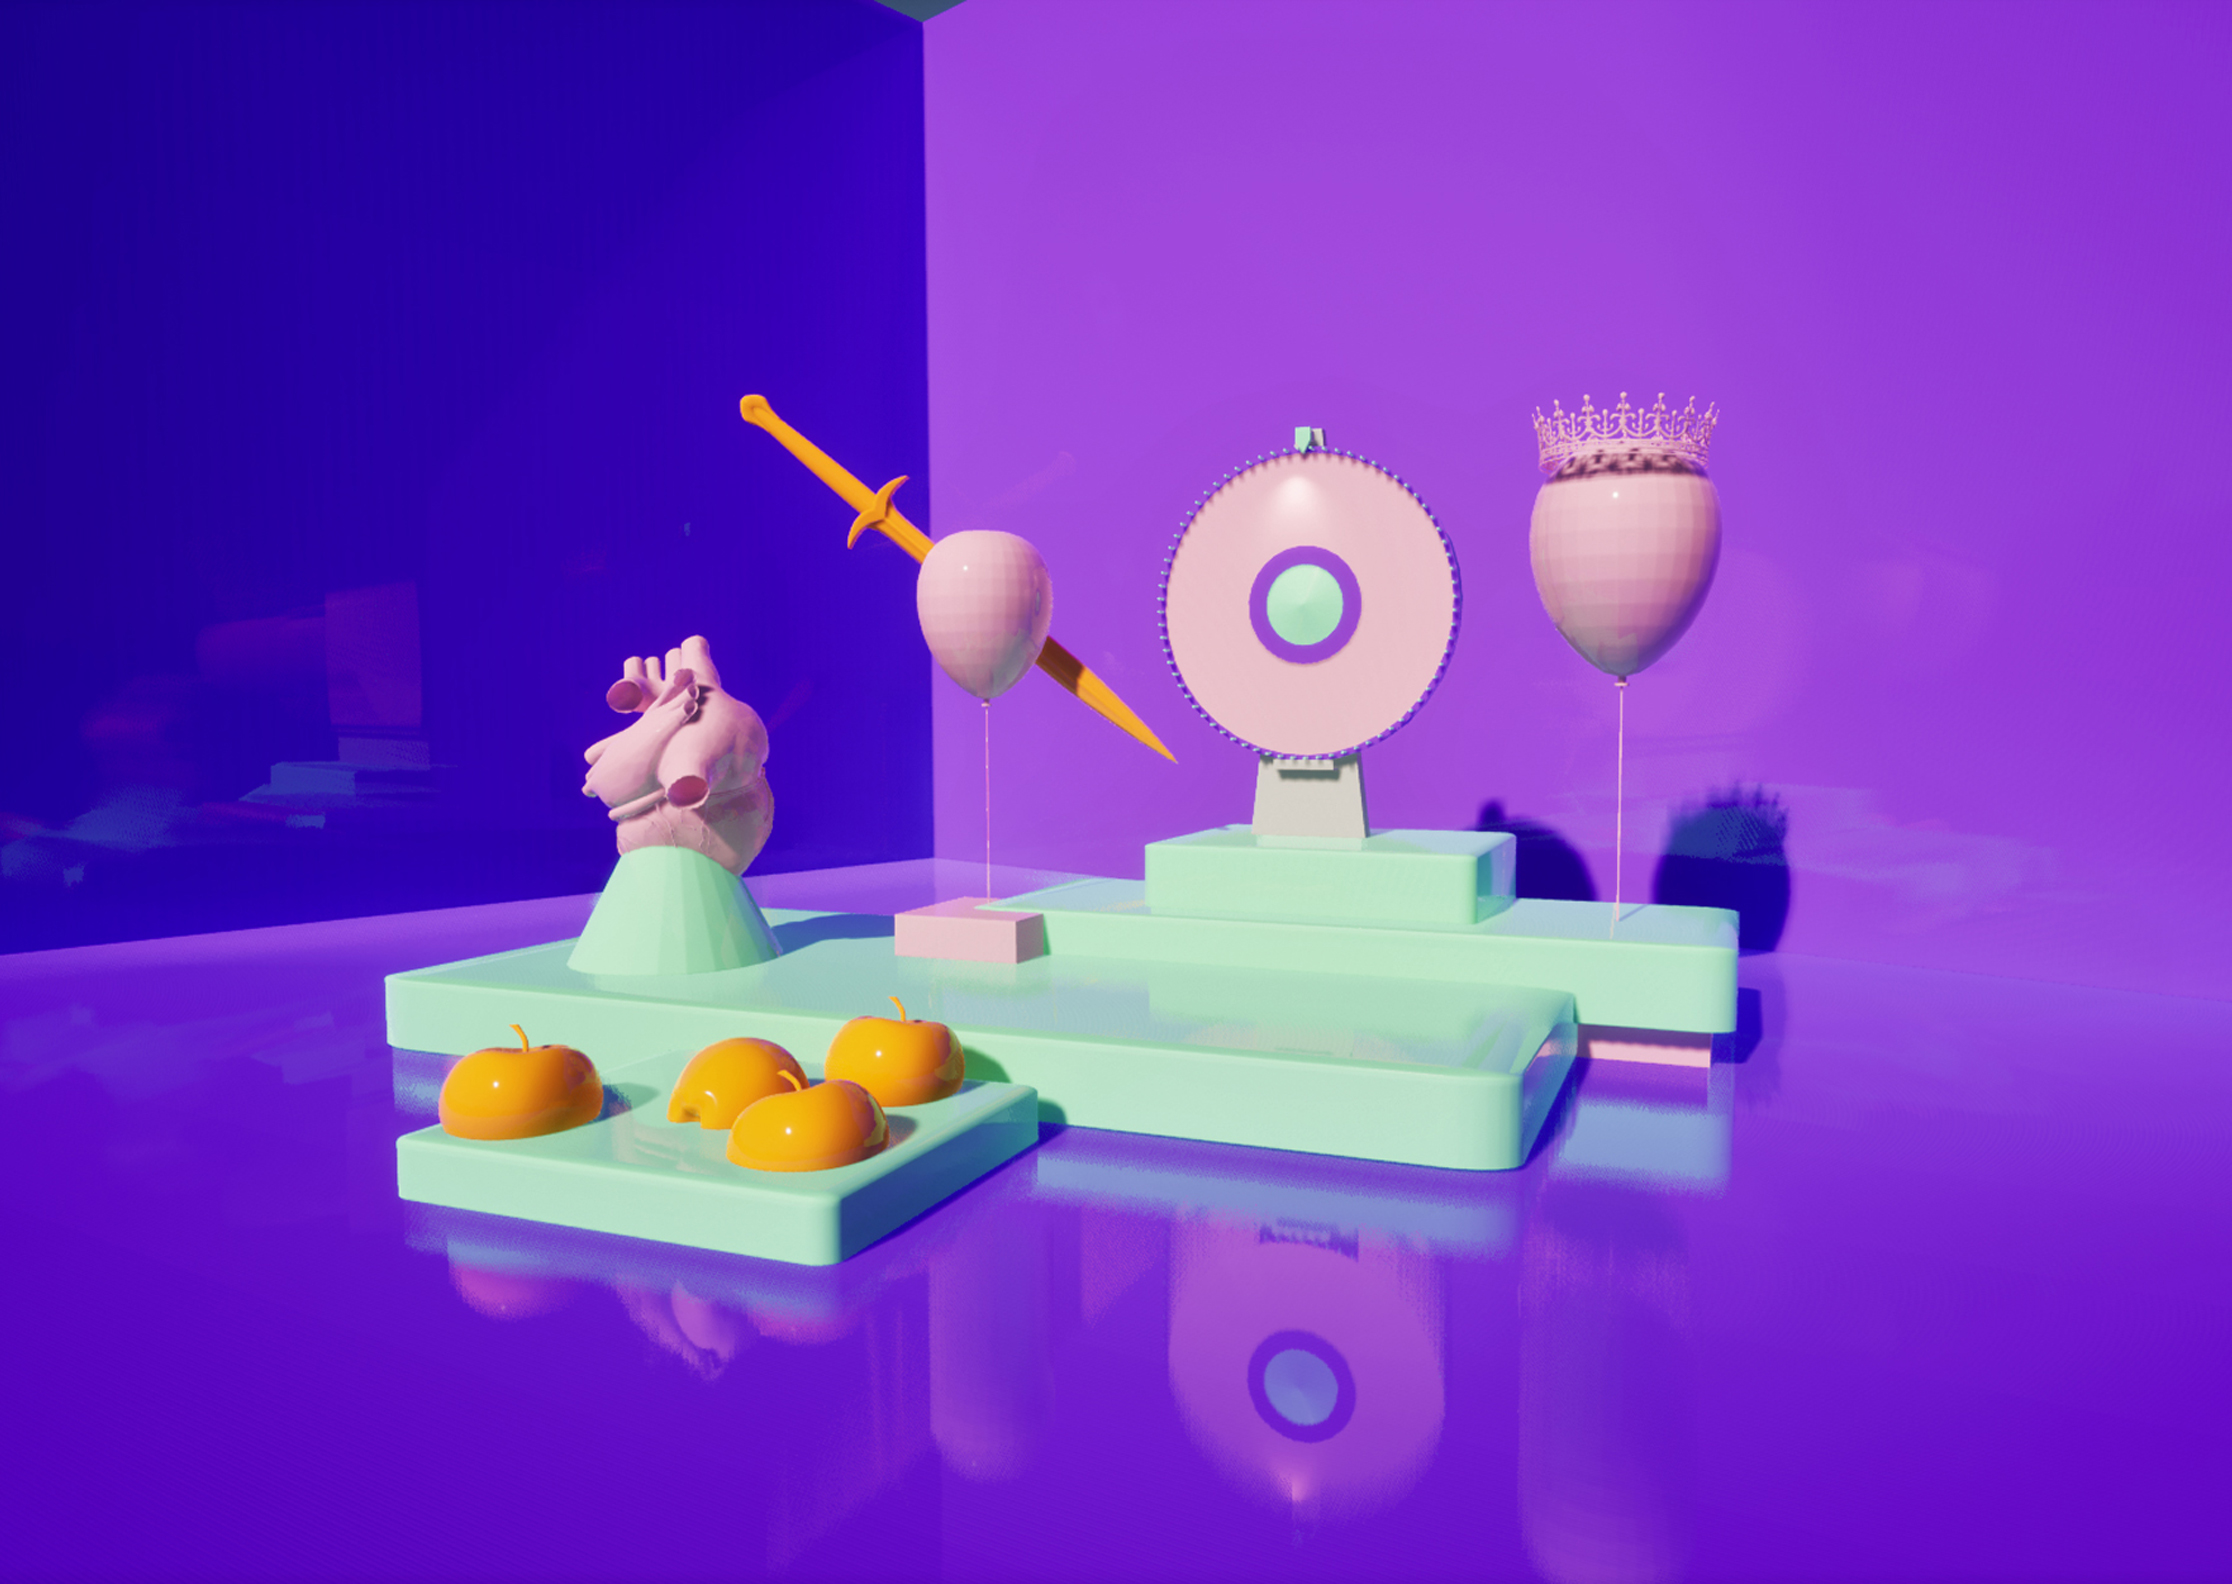 3d digitally modelled and rendered scene featuring apples, balloons, a spear and a heart